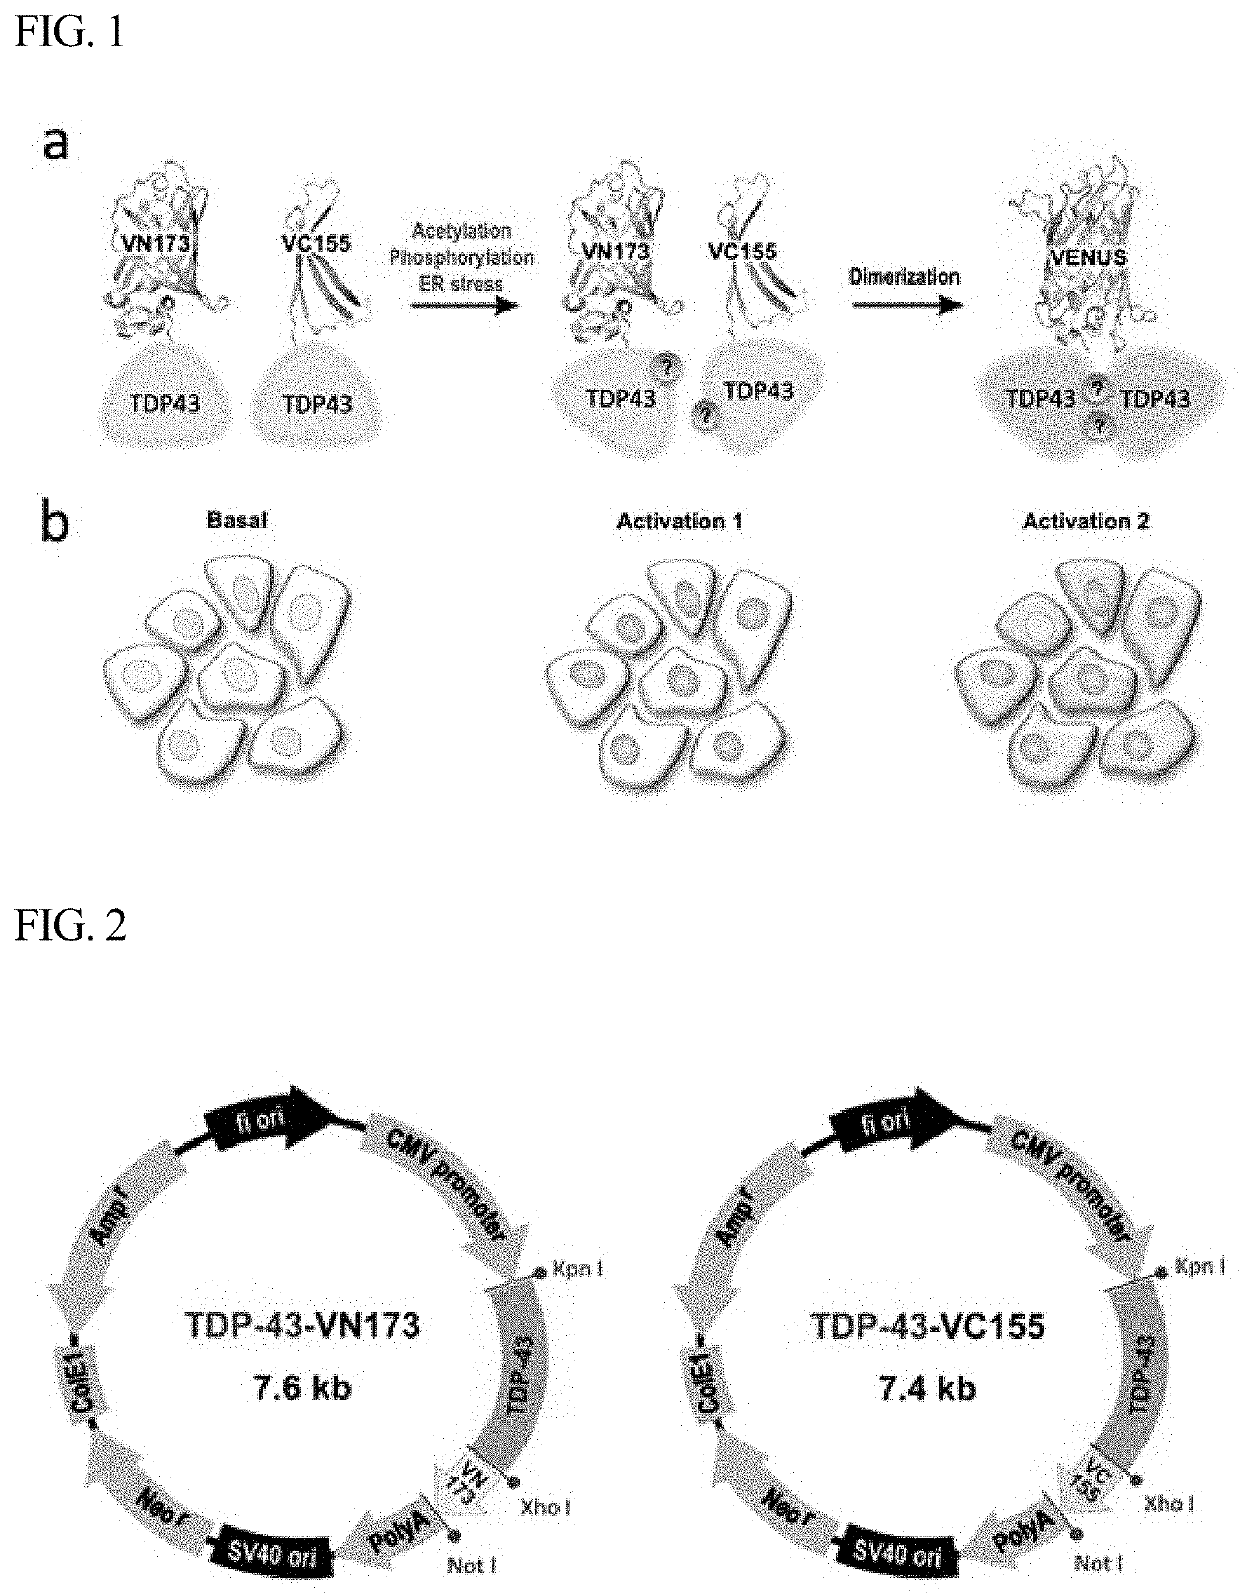 A pair of amino acid sequences for monitoring formation of tdp-43 oligomer in living cells via bimolecular fluorescence complementation